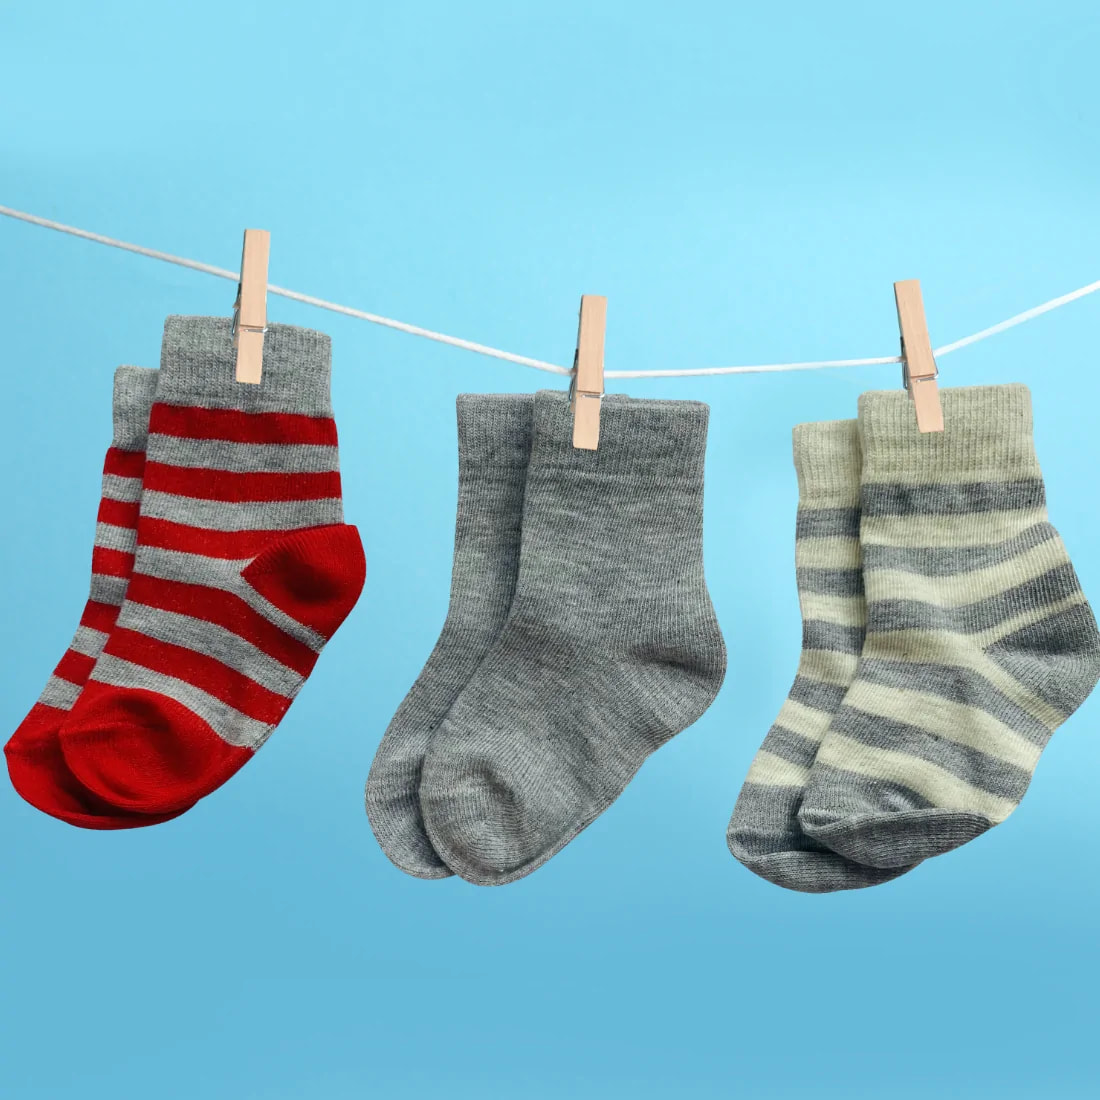 Baby Socks 12-24 Months - Unisex Grey Striped & Solid (Pack of 3)